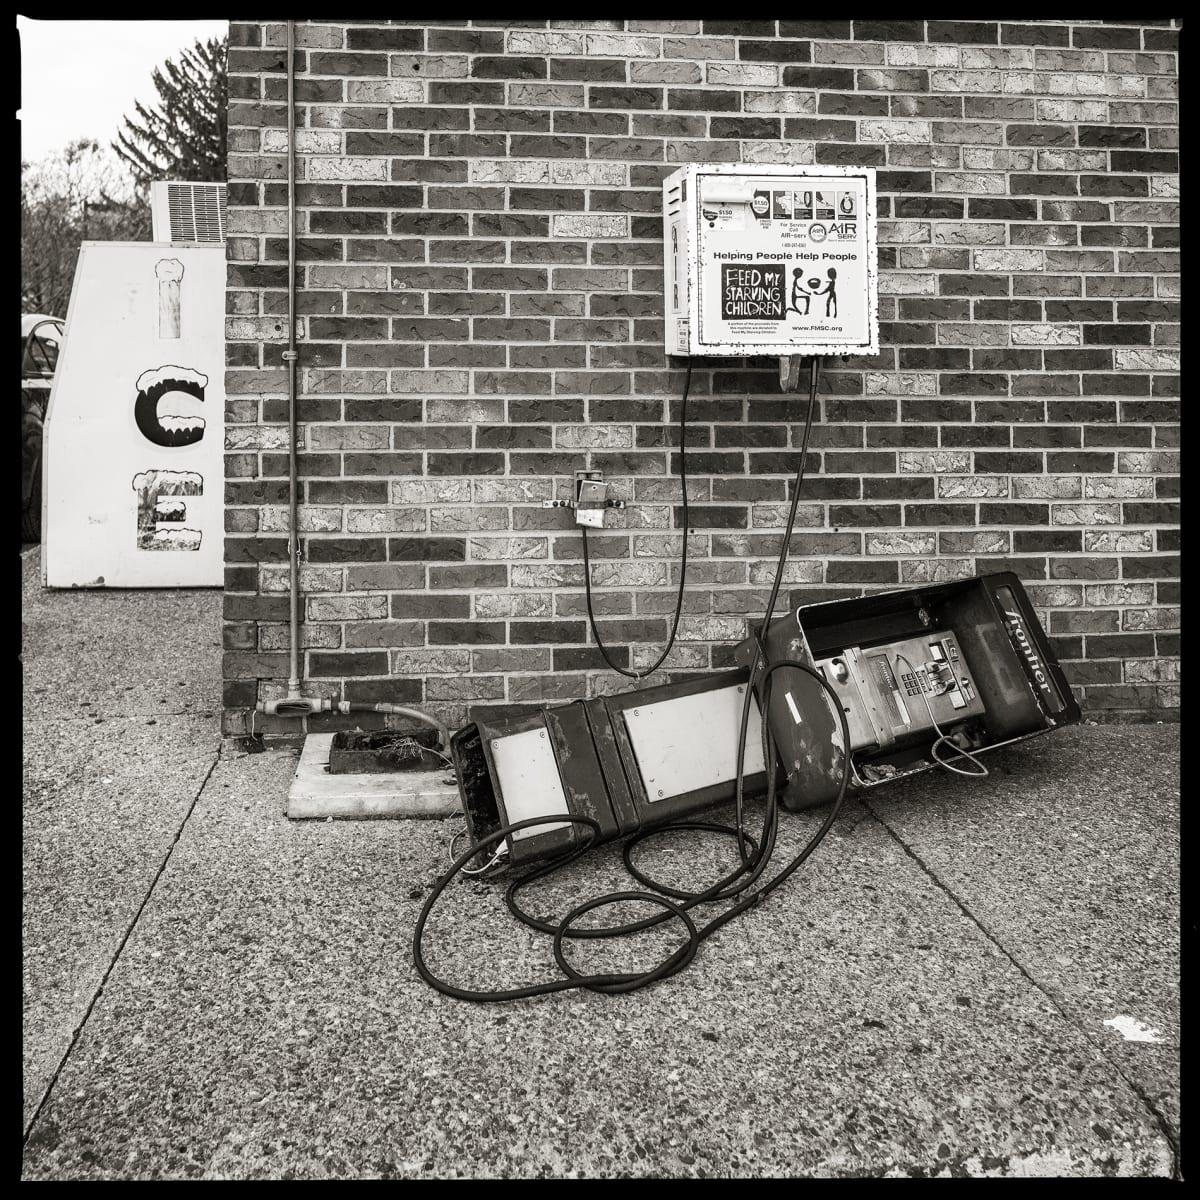 585.266.9507 – AB Convenient Market, 1684 Norton Street, Rochester, NY 14609 by Eric T. Kunsman  Image: ID: A black and white image shows a payphone that has been destroyed.  It is laying on the sidewalk with wires around it.  There is a brick building in the background.